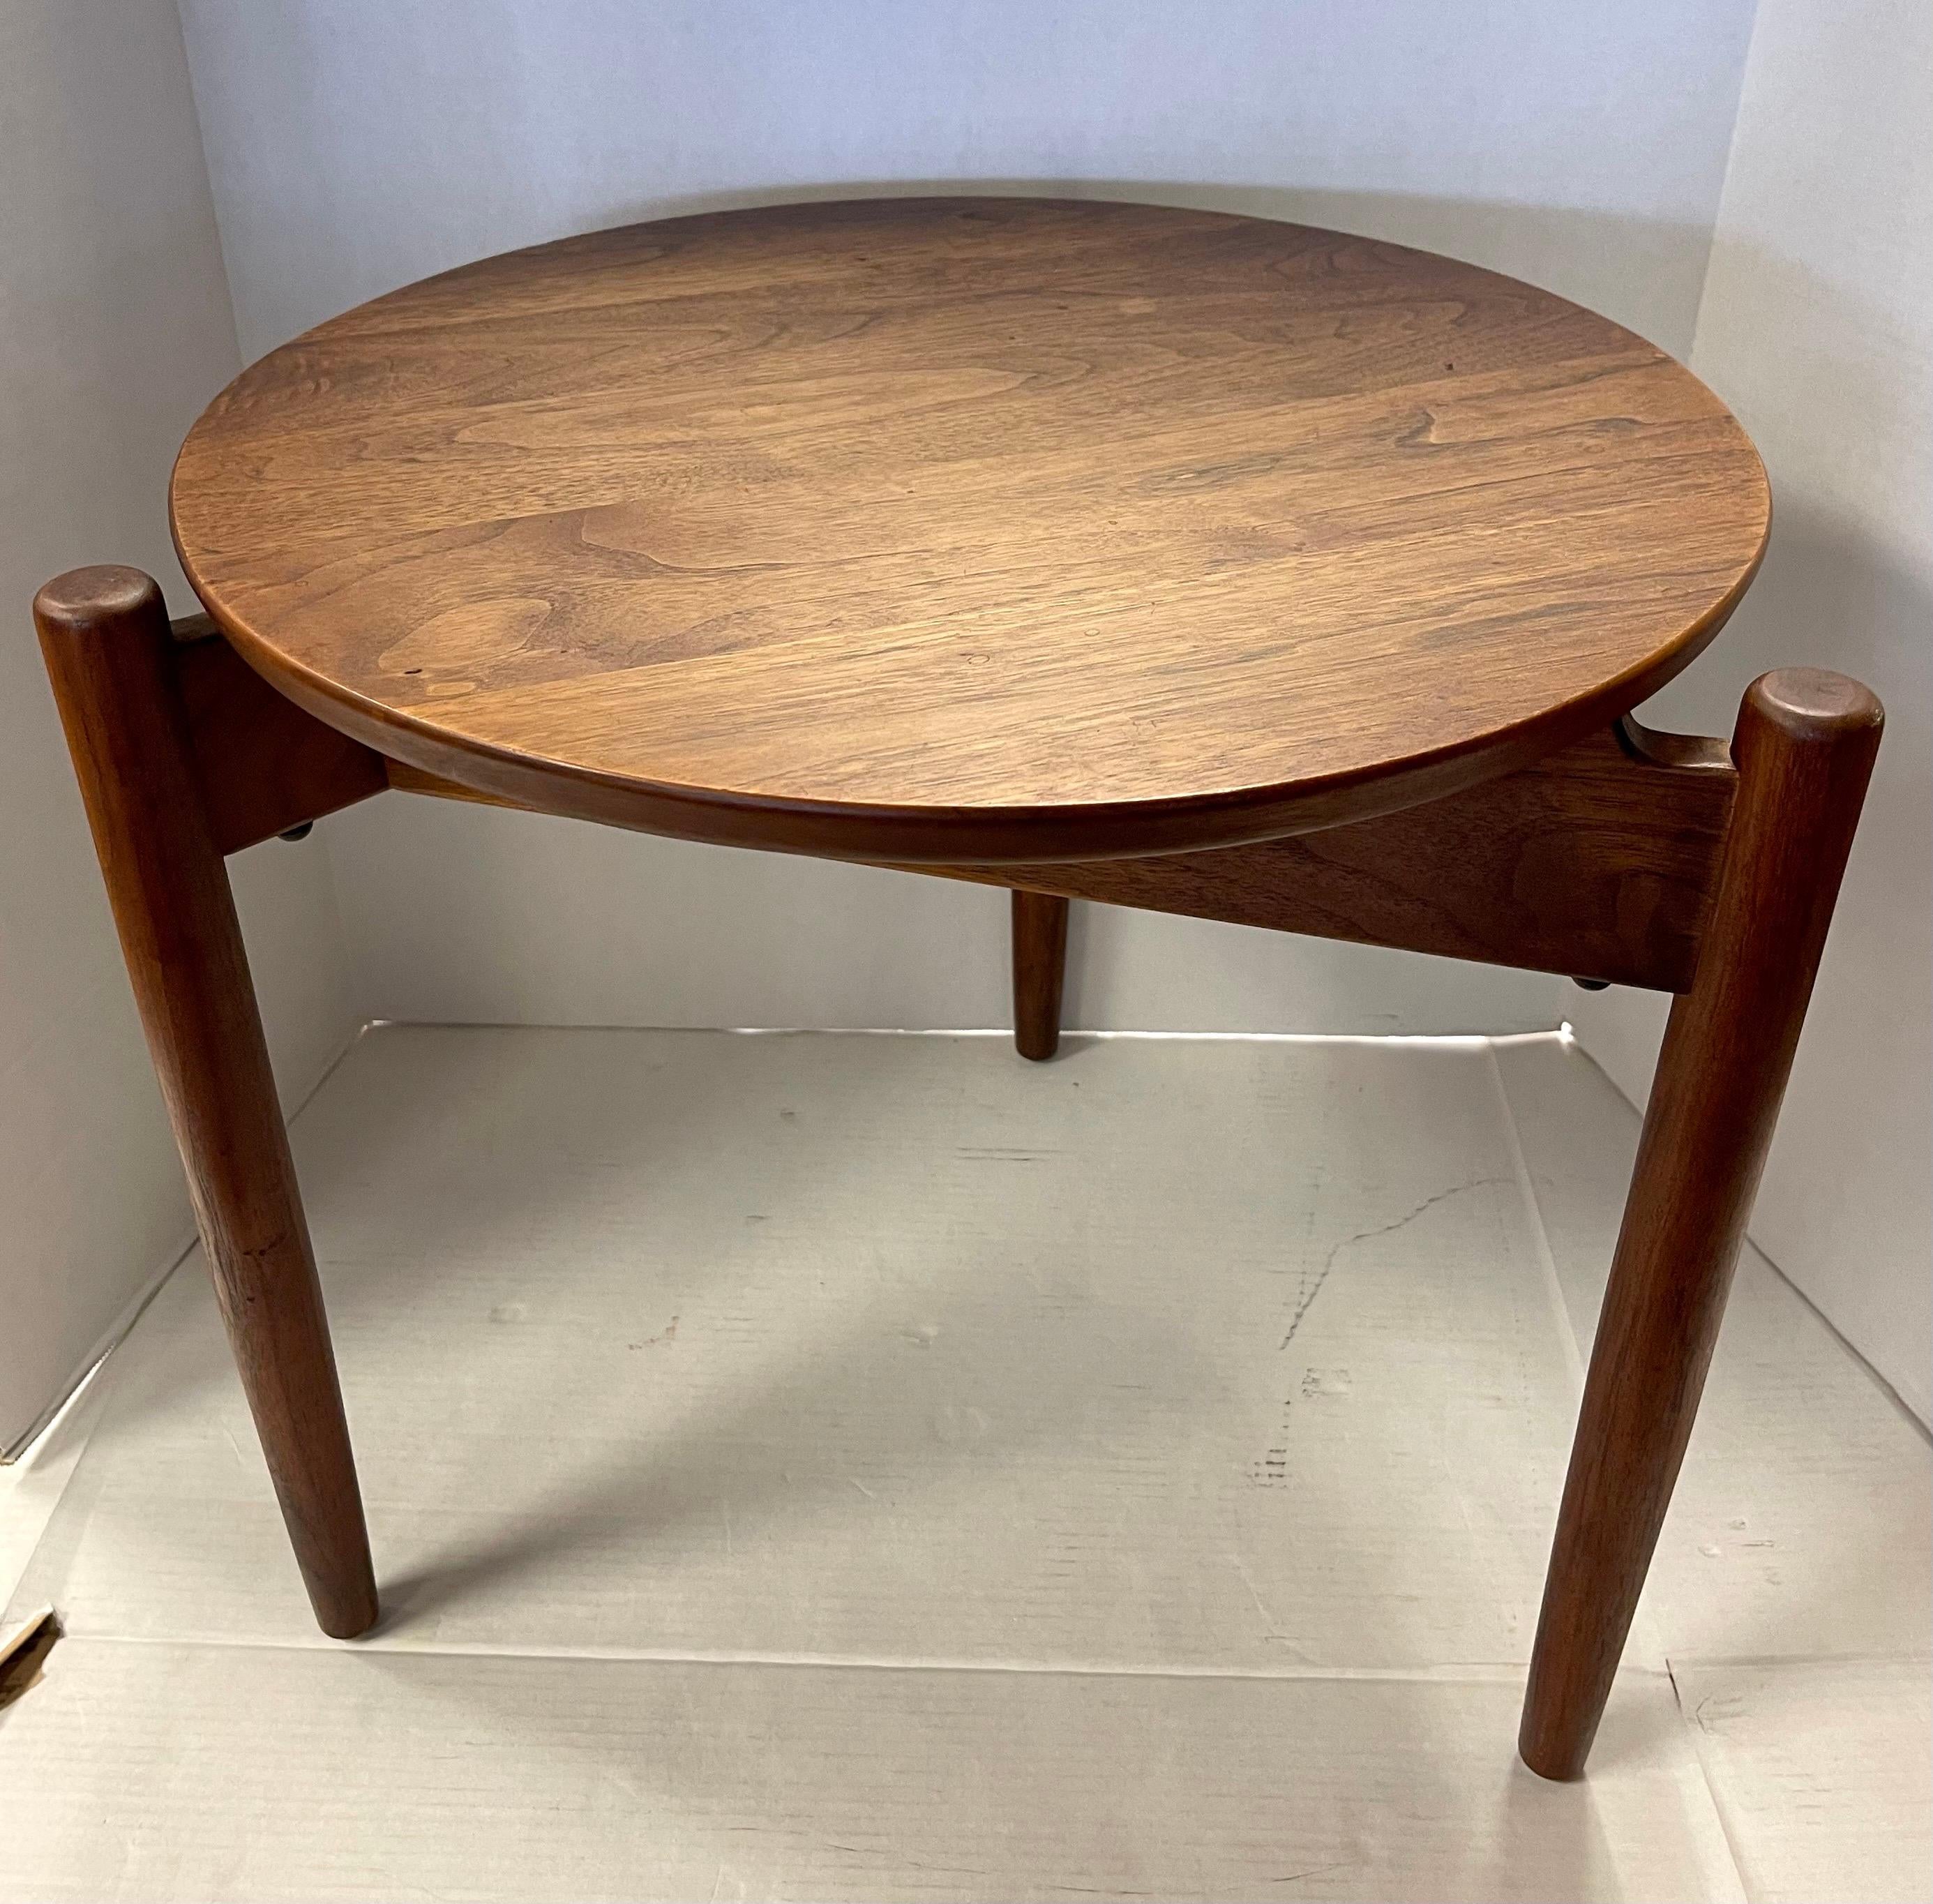 This stunning Jens Risom design round side/end/occasional table is constructed from beautiful Mid-Century teak. Iconic yet practical Danish design makes this a stunning table perfect for home or business use. Three leg design is complimented by